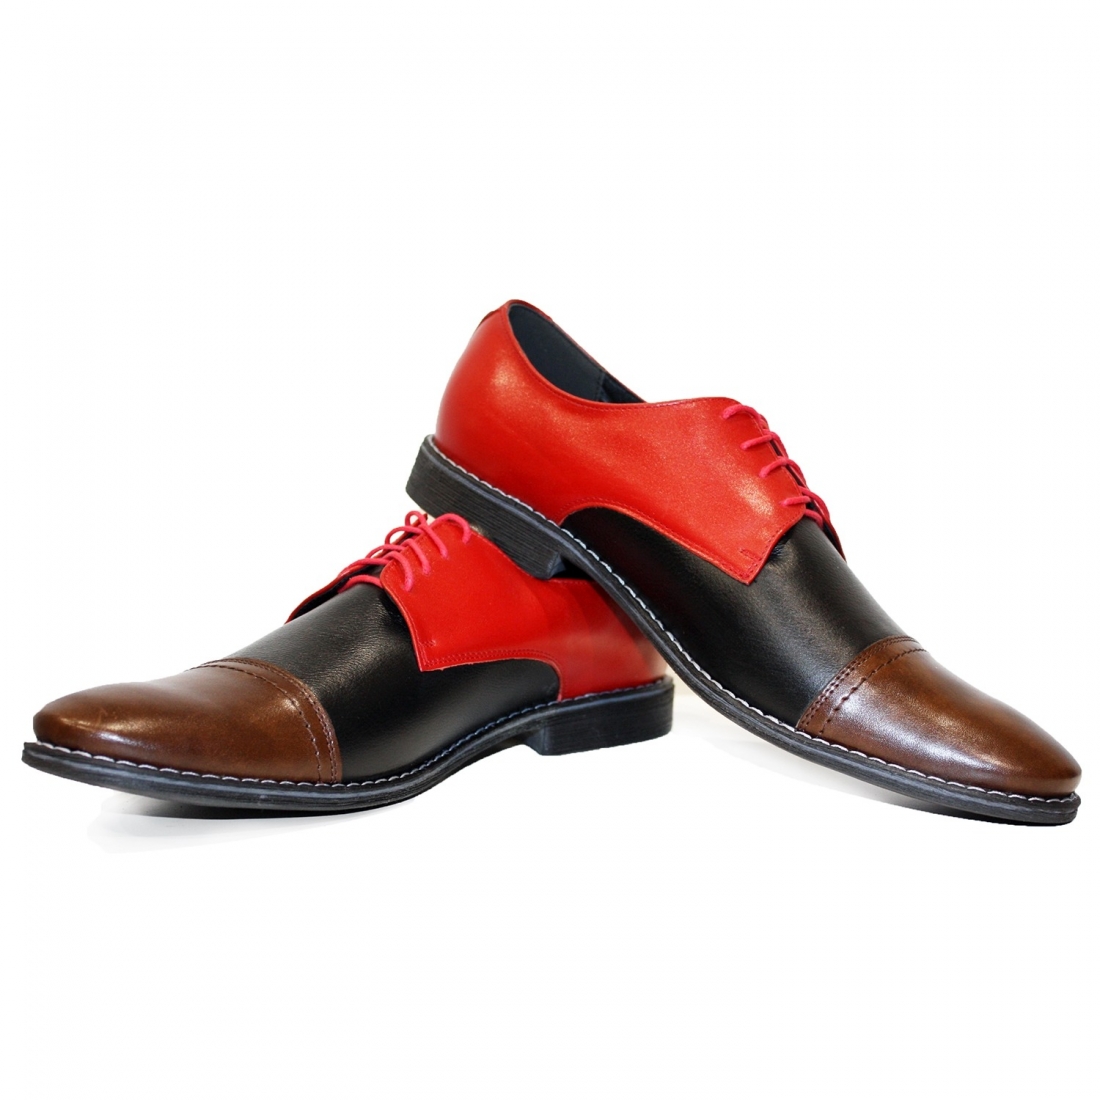 Modello Pabirreto - Colorful Lace-Up Oxfords Dress Shoes - Cowhide ...